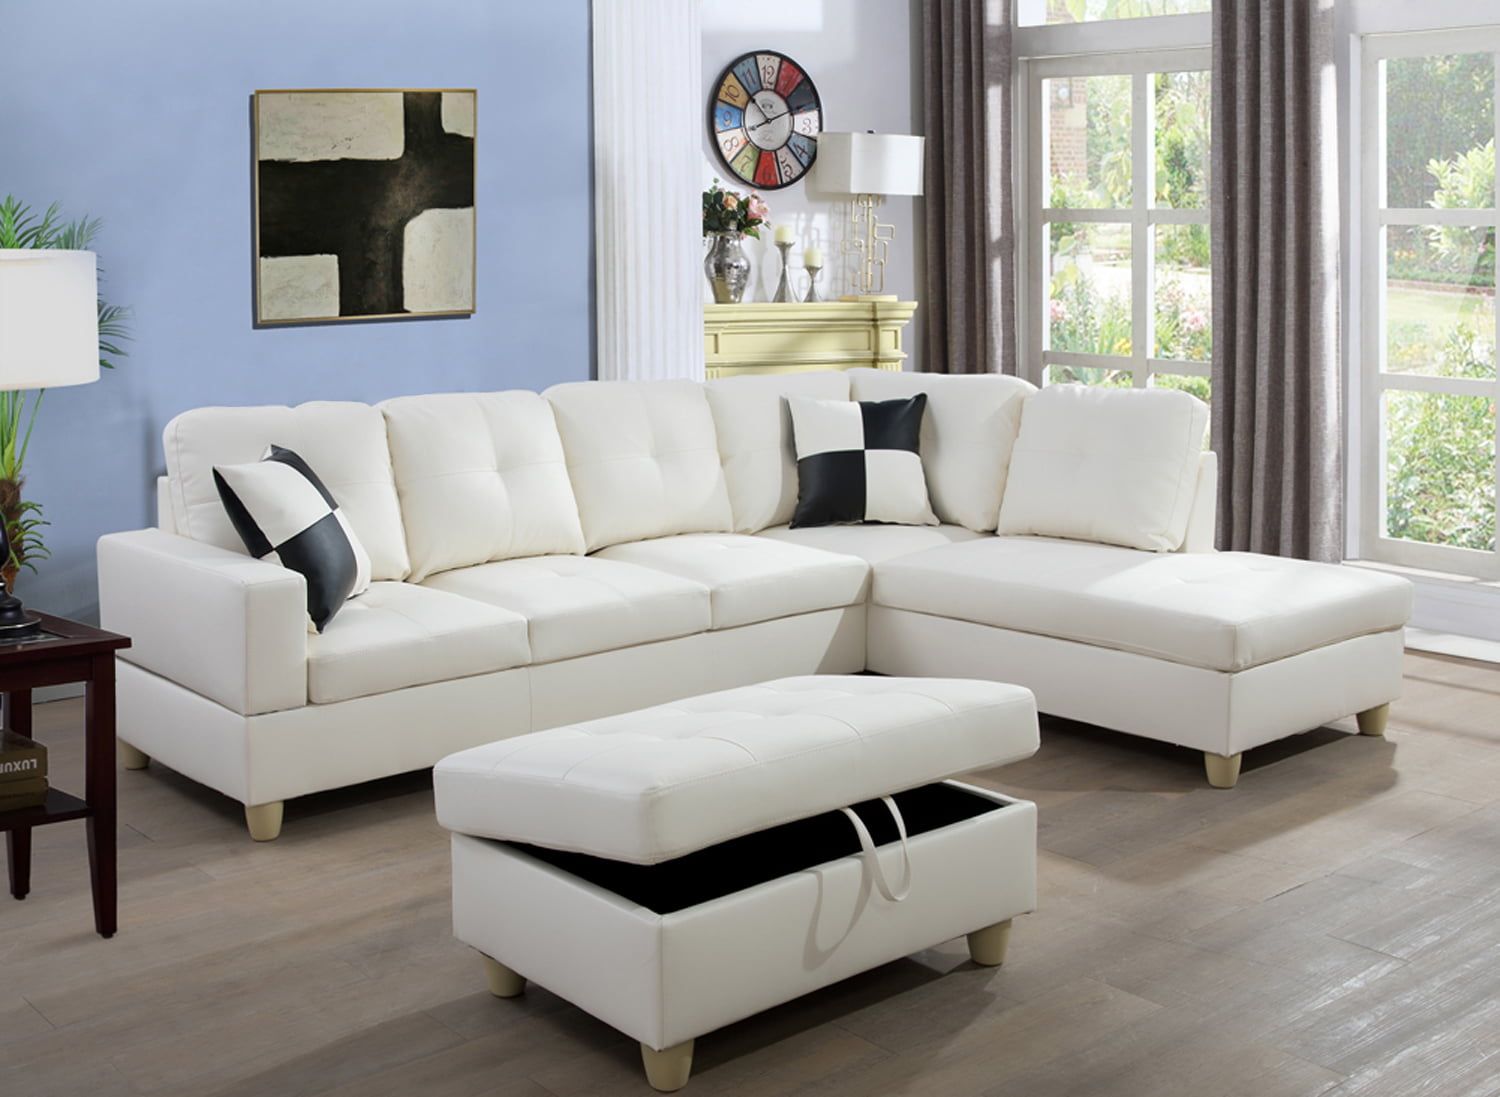 Ainehome Faux Leather Sectional Set, Living Room L Shaped Modern Sofa With Regard To Faux Leather Sectional Sofa Sets (Gallery 5 of 21)